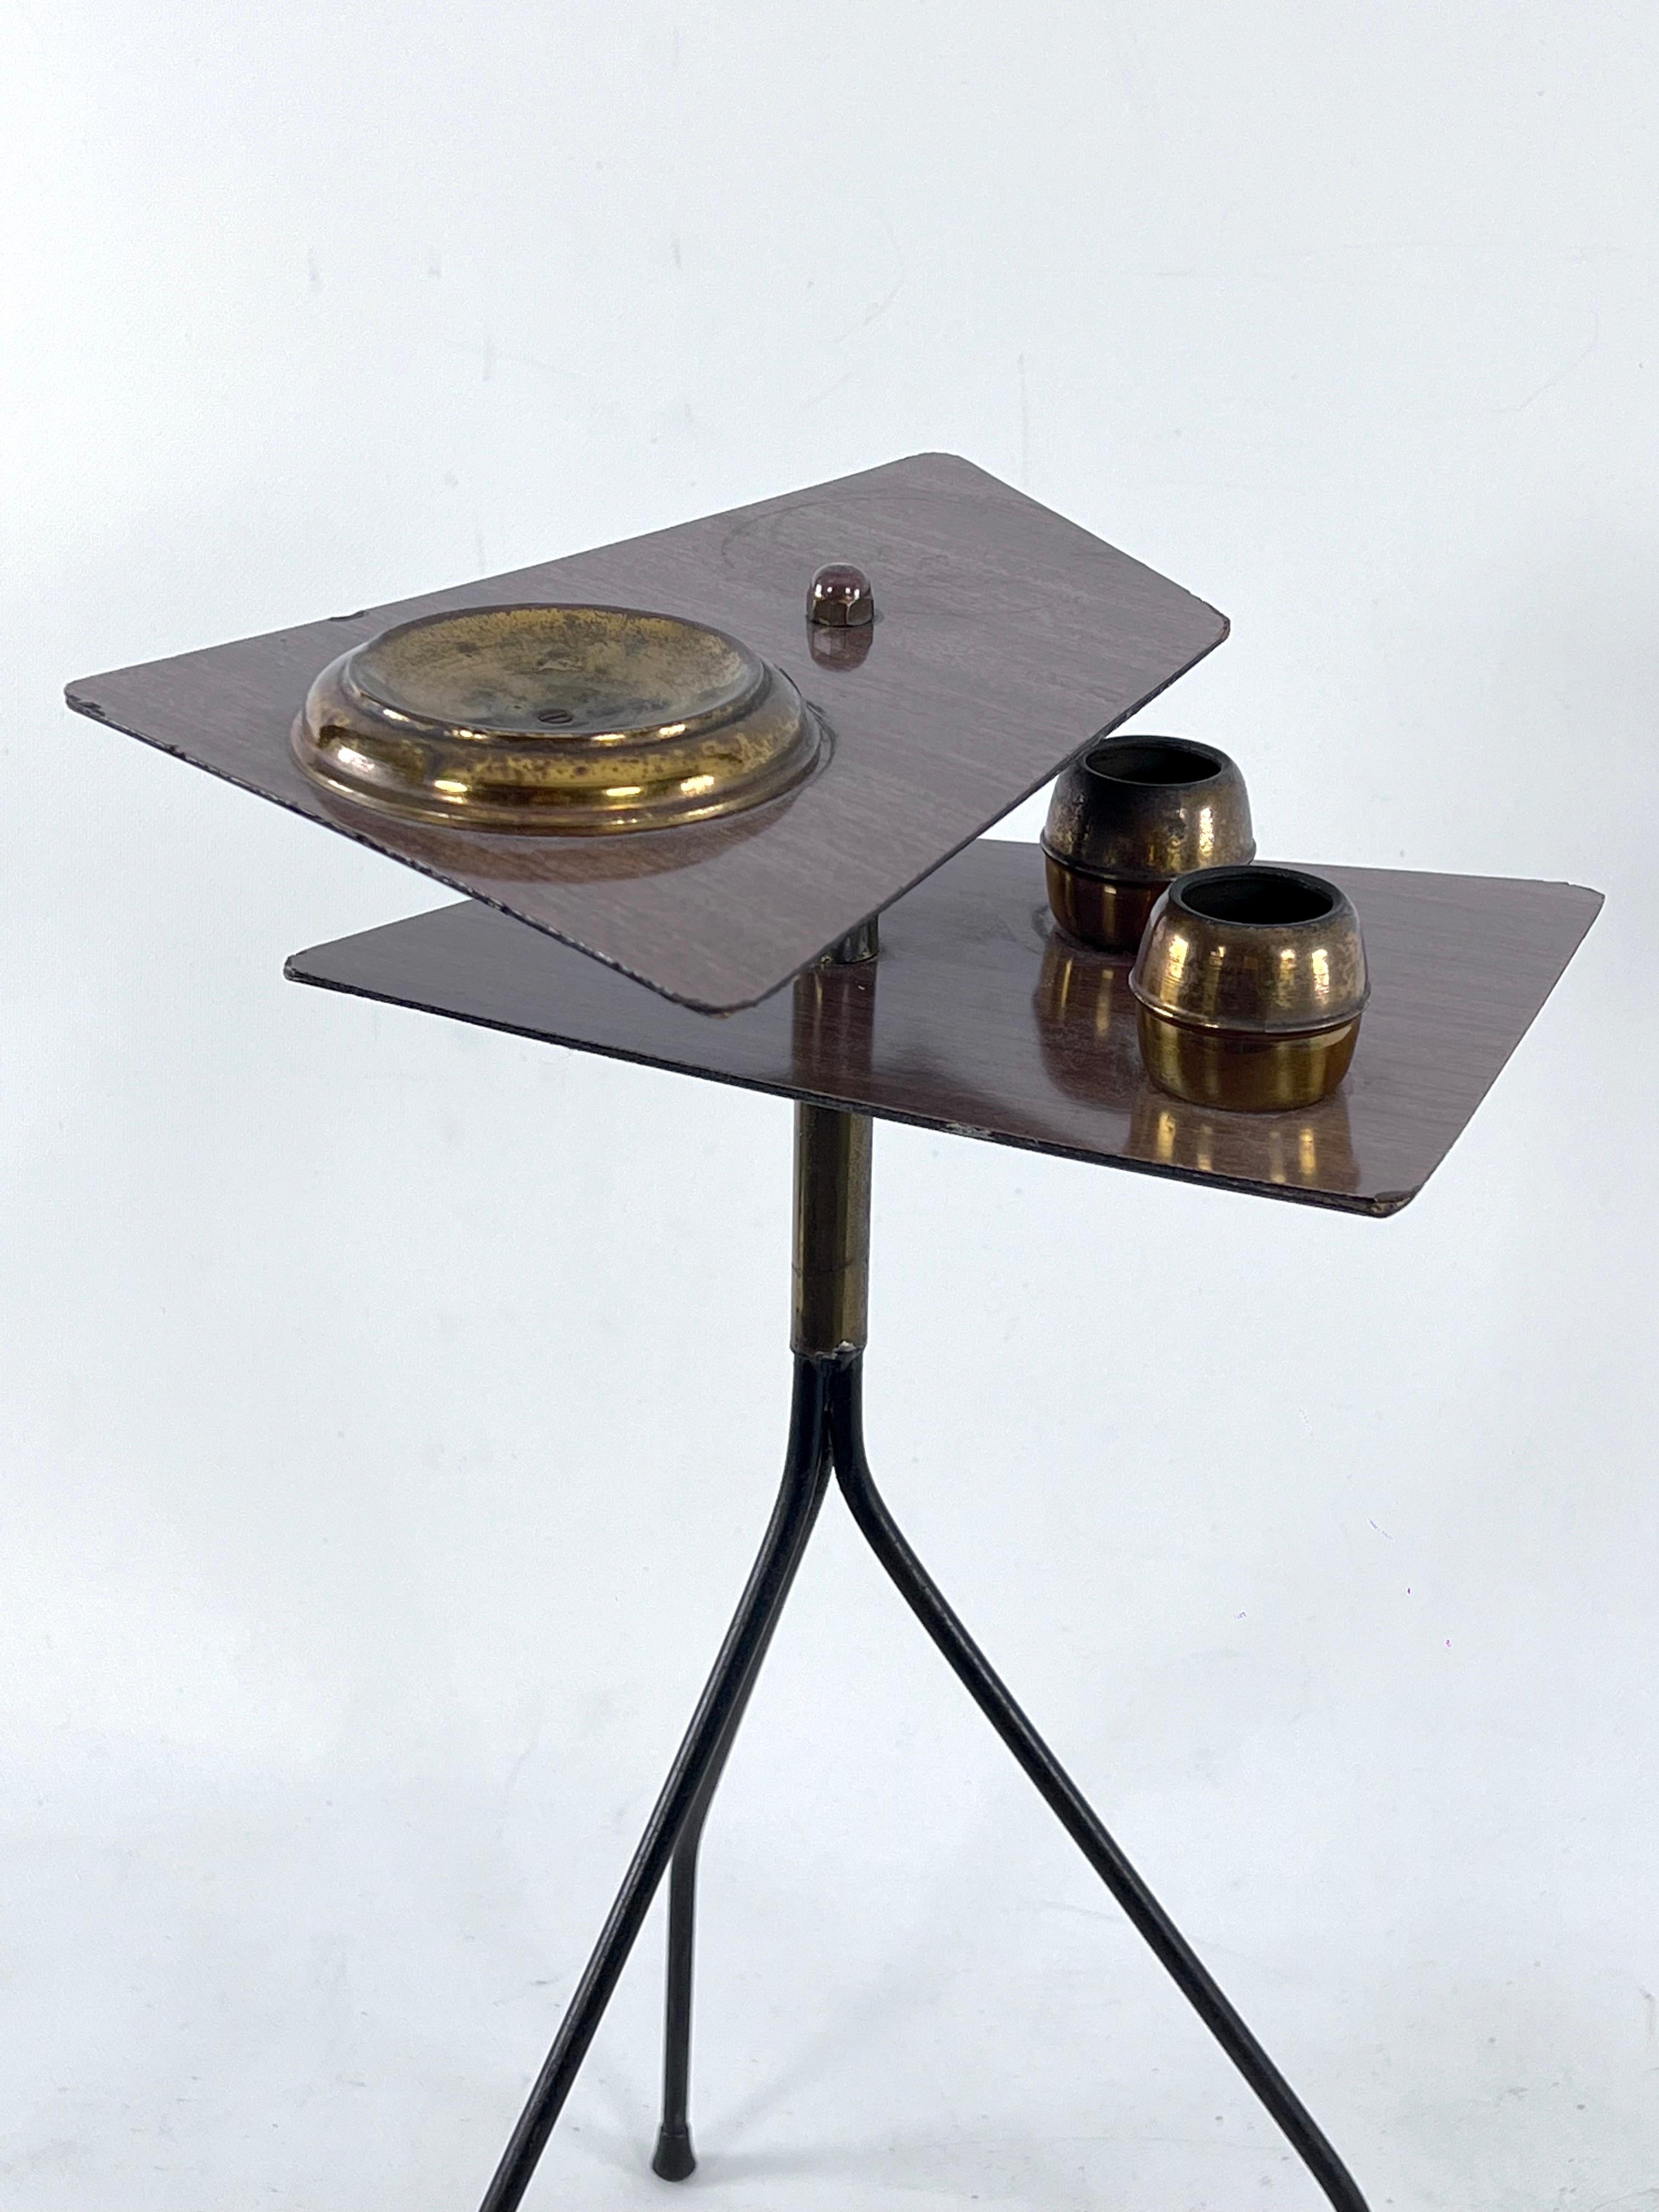 Midcentury Ashtray Tripod in Brass and Formica, Italy, 1950s For Sale 3